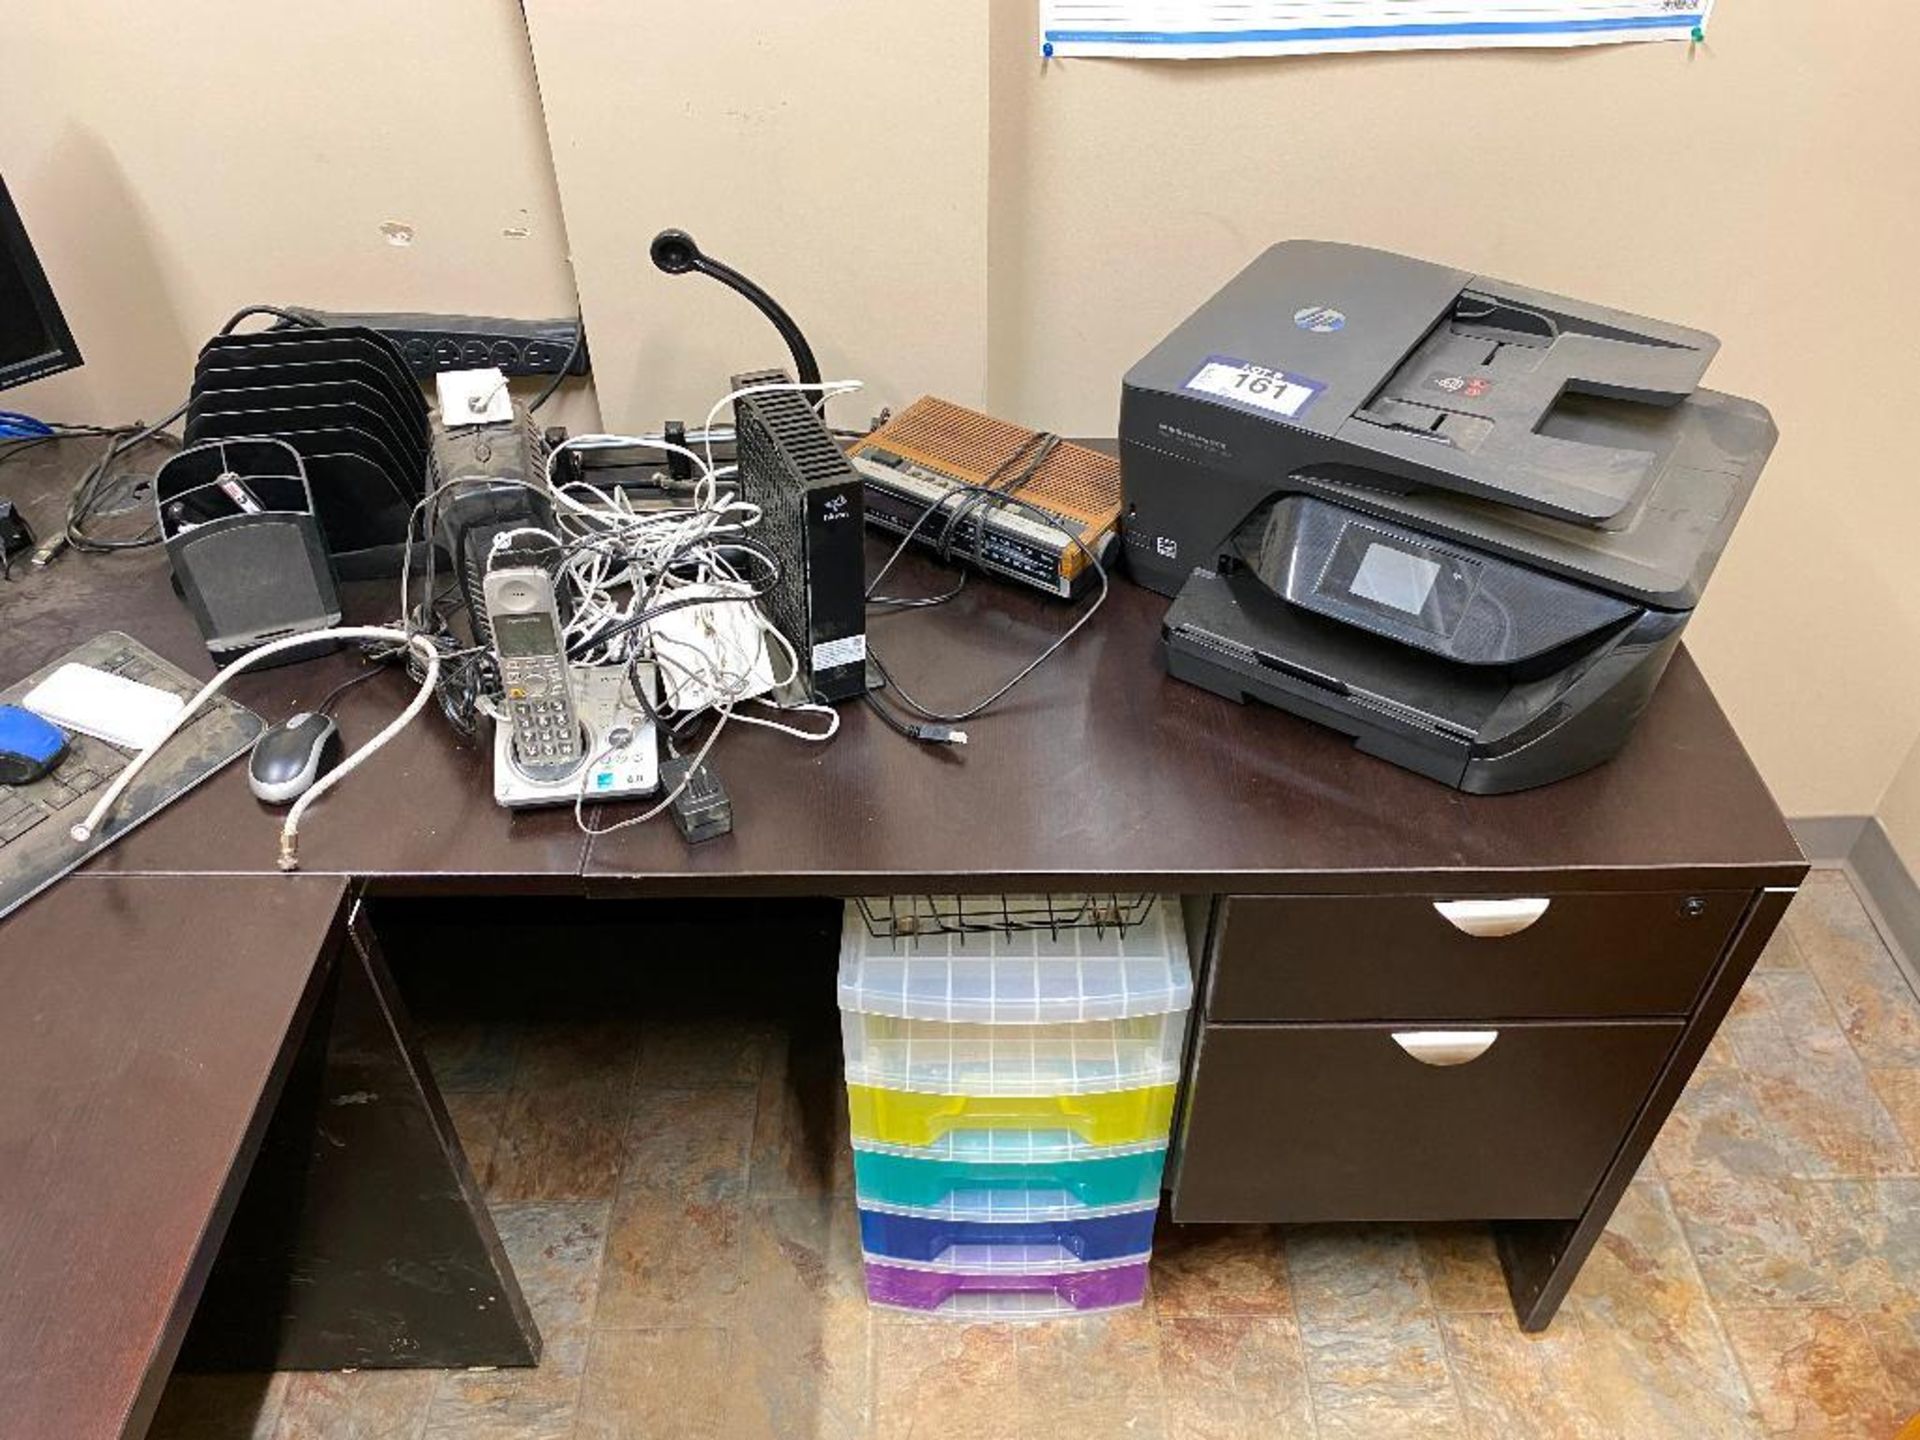 Lot of (2) Monitors, Lorex Security System, Routers, Phone, Printer, etc. - Image 3 of 3